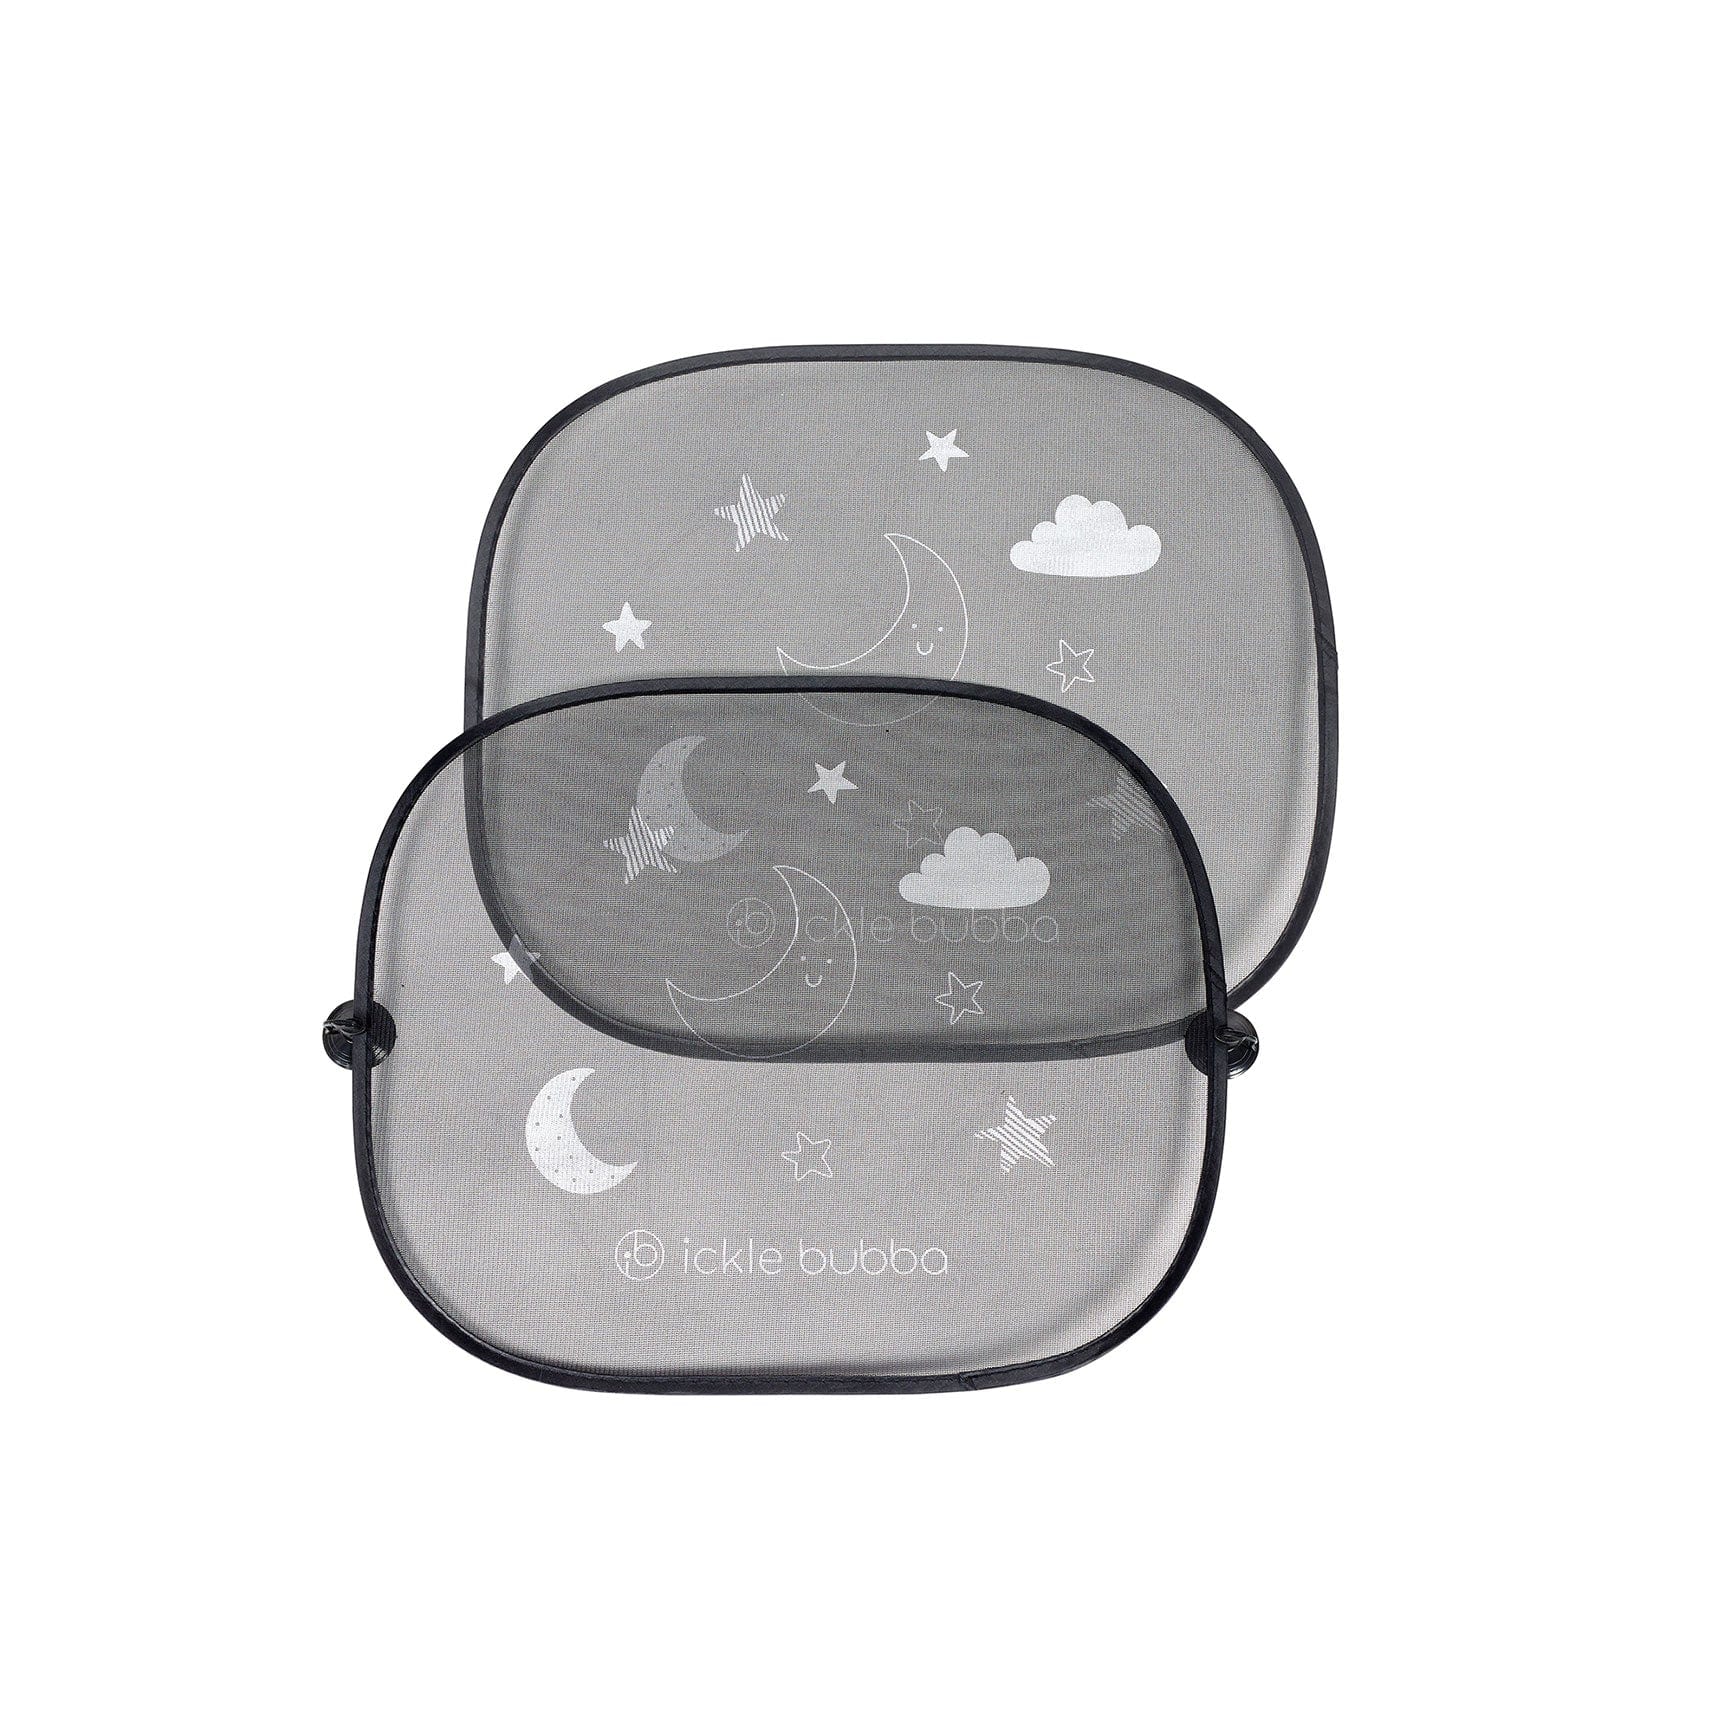 Ickle Bubba travel systems Ickle Bubba Stomp Luxe All-in-One Travel System with Isofix Base - Black/Pearl Grey/Tan